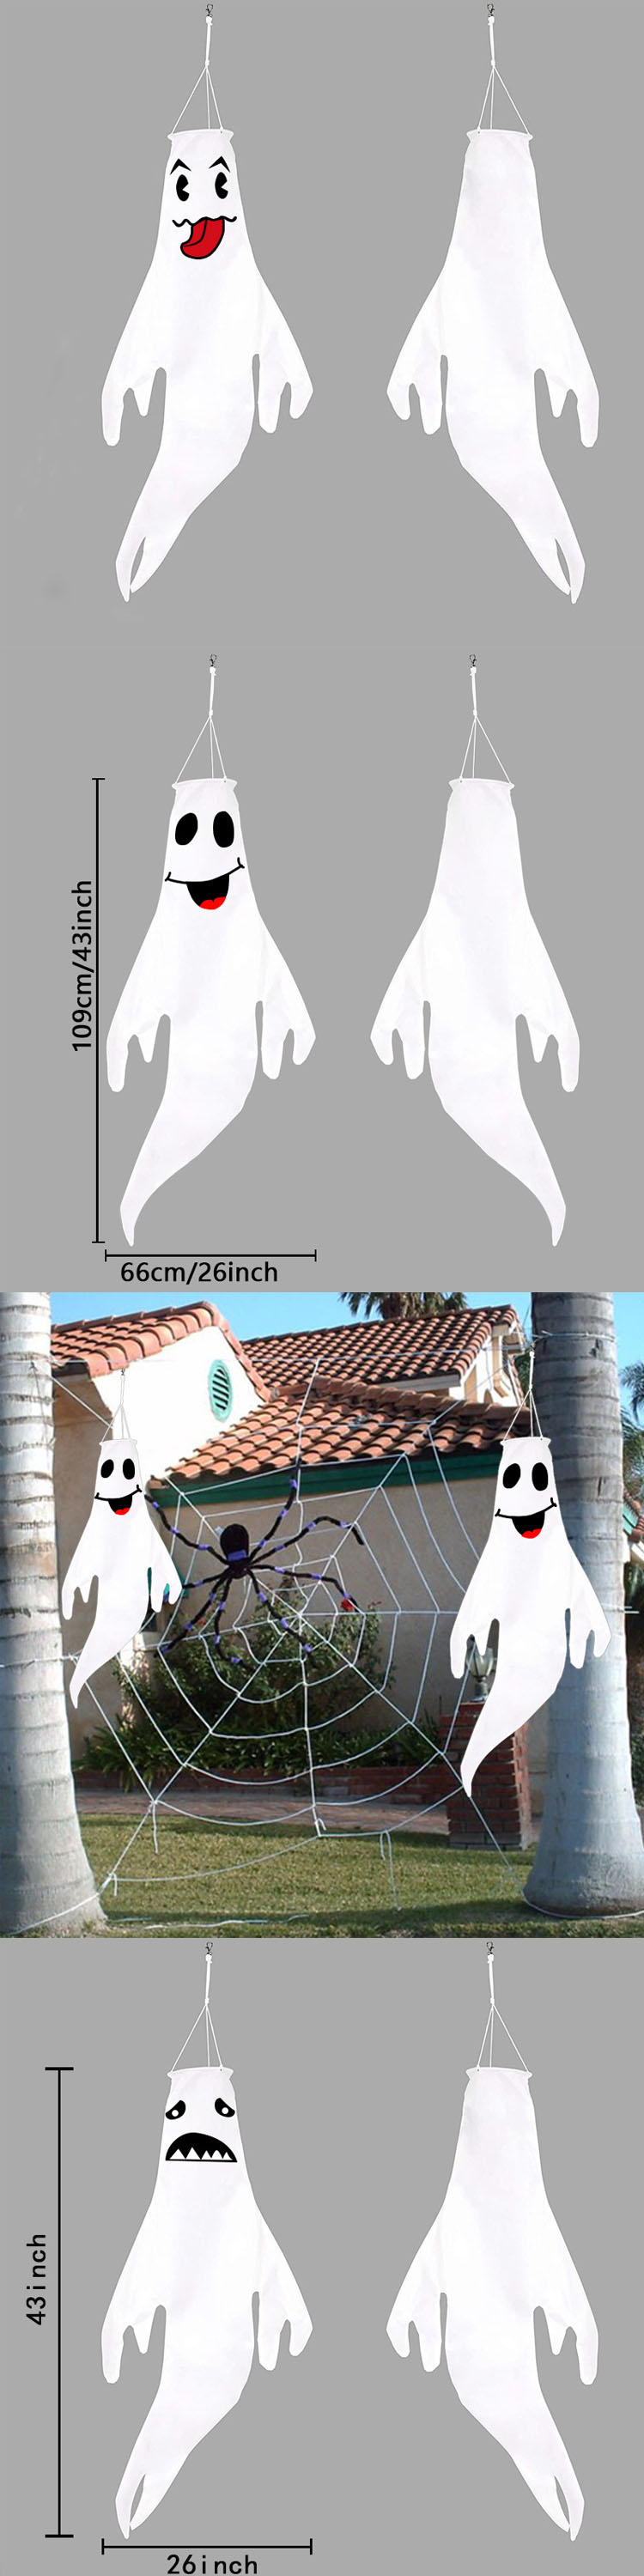 SUNBEAUTY Terror Toy White Ghost Grimace Windsock Event Party Supplies Halloween Decoration Outdoor